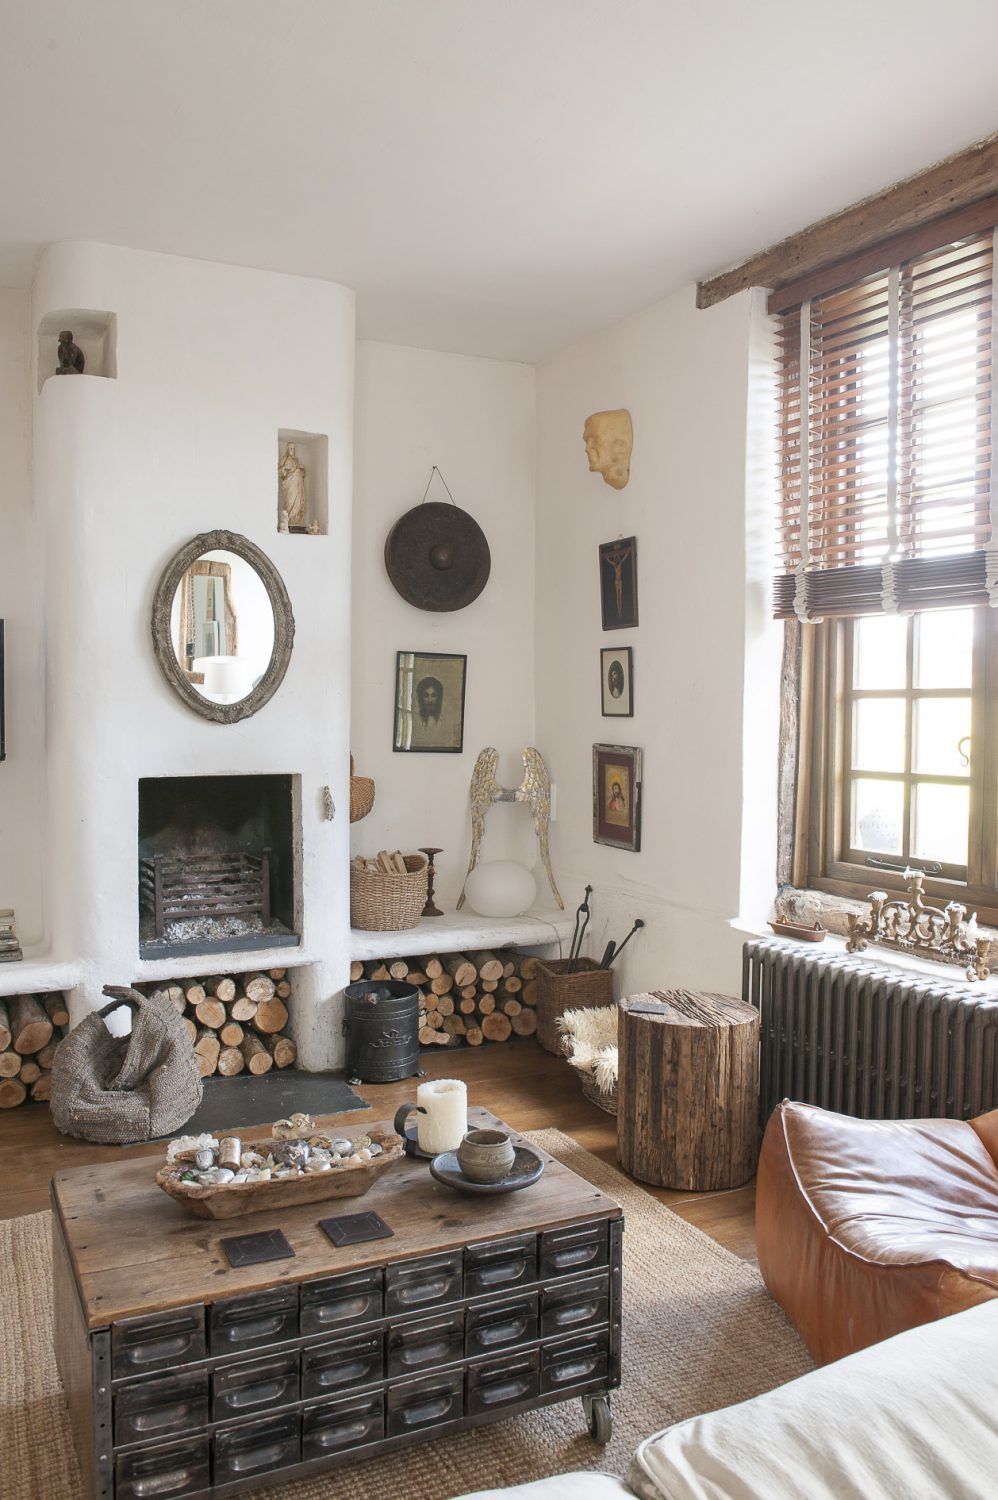 A cosy seating area gathers around a white Moorish fireplace and chimney